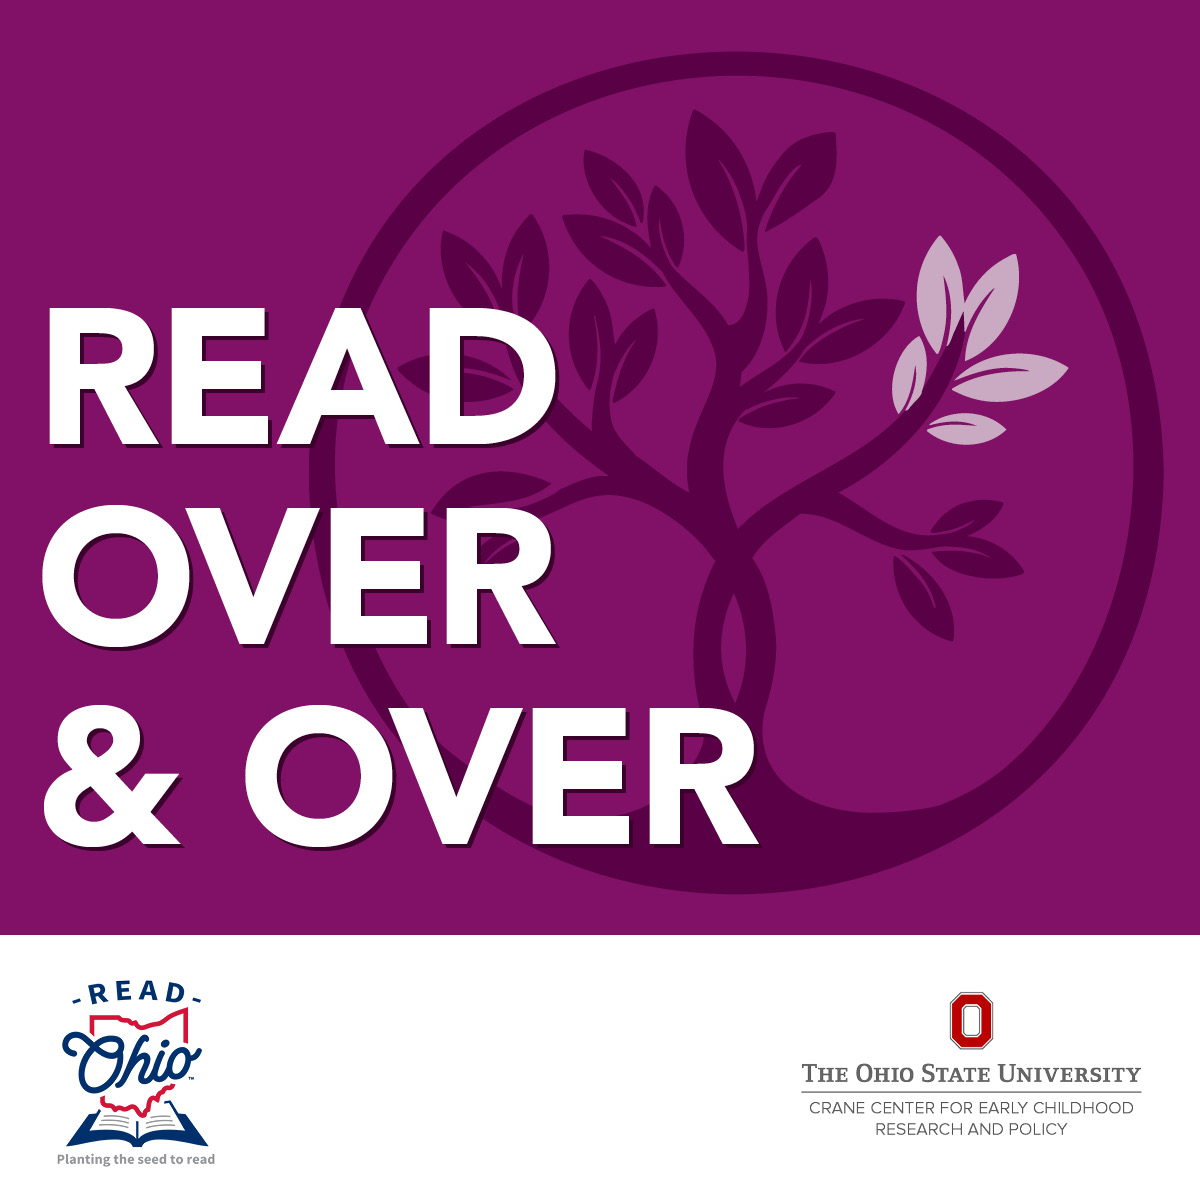 Read Together, Grow Together tree logo in one color (purple) with the words "read over & over" on top.